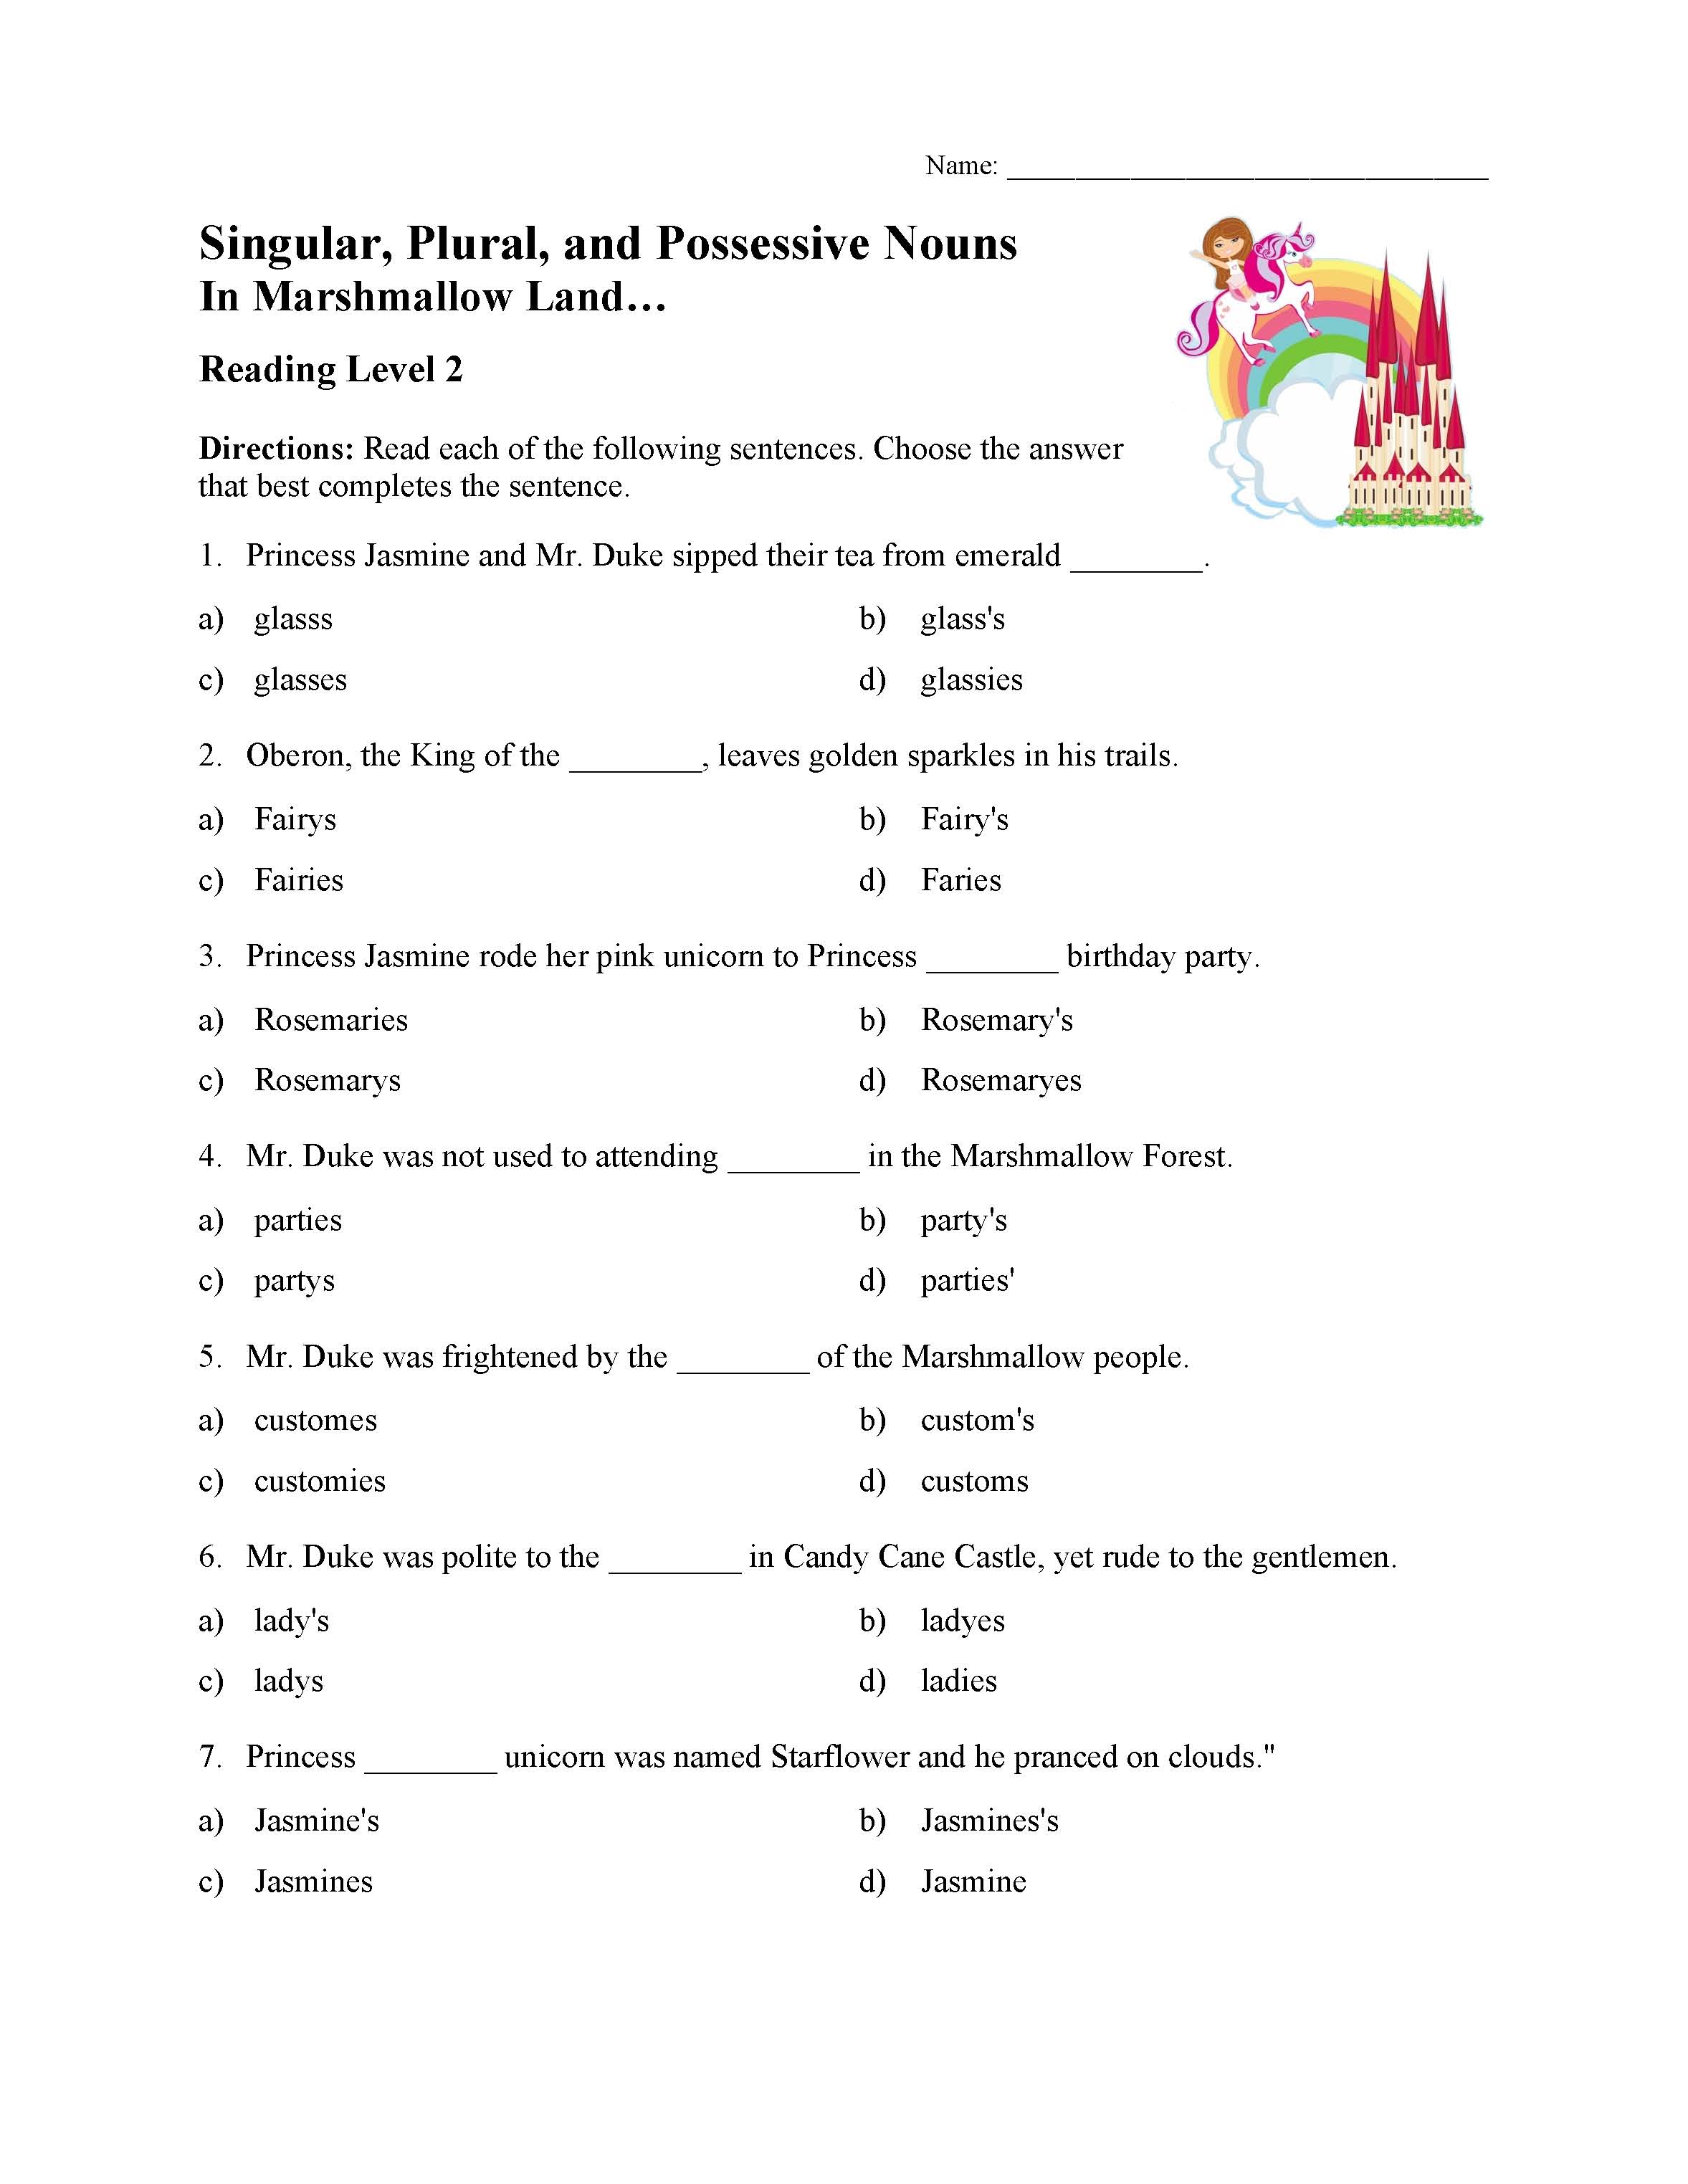 This is a preview image of the Singular, Plural, and Possessive Nouns Test 1 | Reading Level 2.